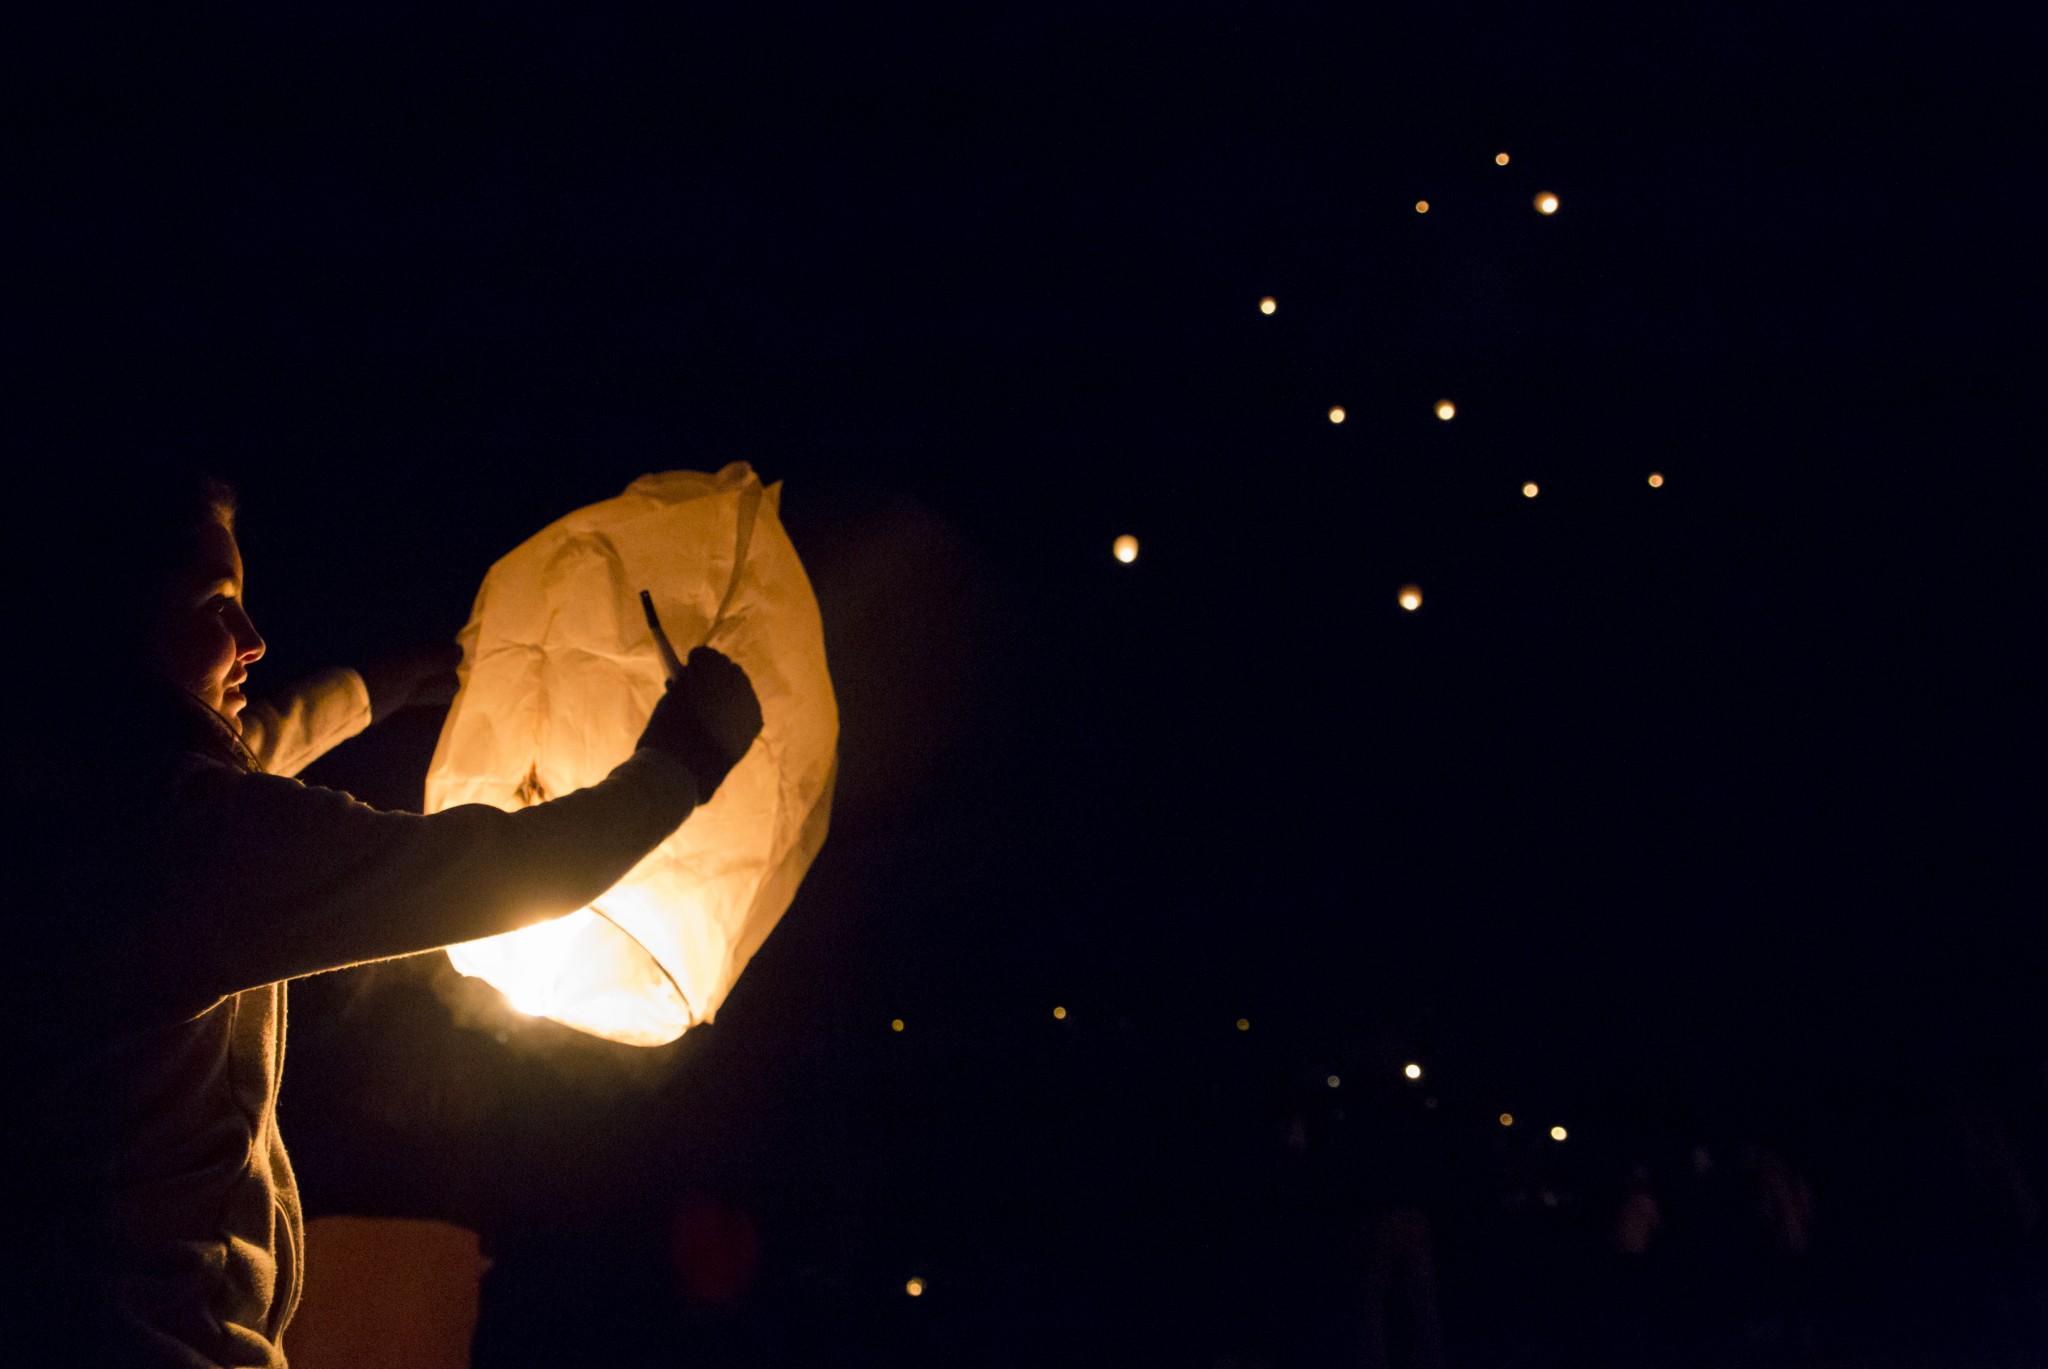 Sophomore communication science and disorders major Caroline Stottler releases a Chinese paper lantern Thursday night at the pavillion along the greenway in honor of Mandie Phillips, who died in a car accident in December 2014.